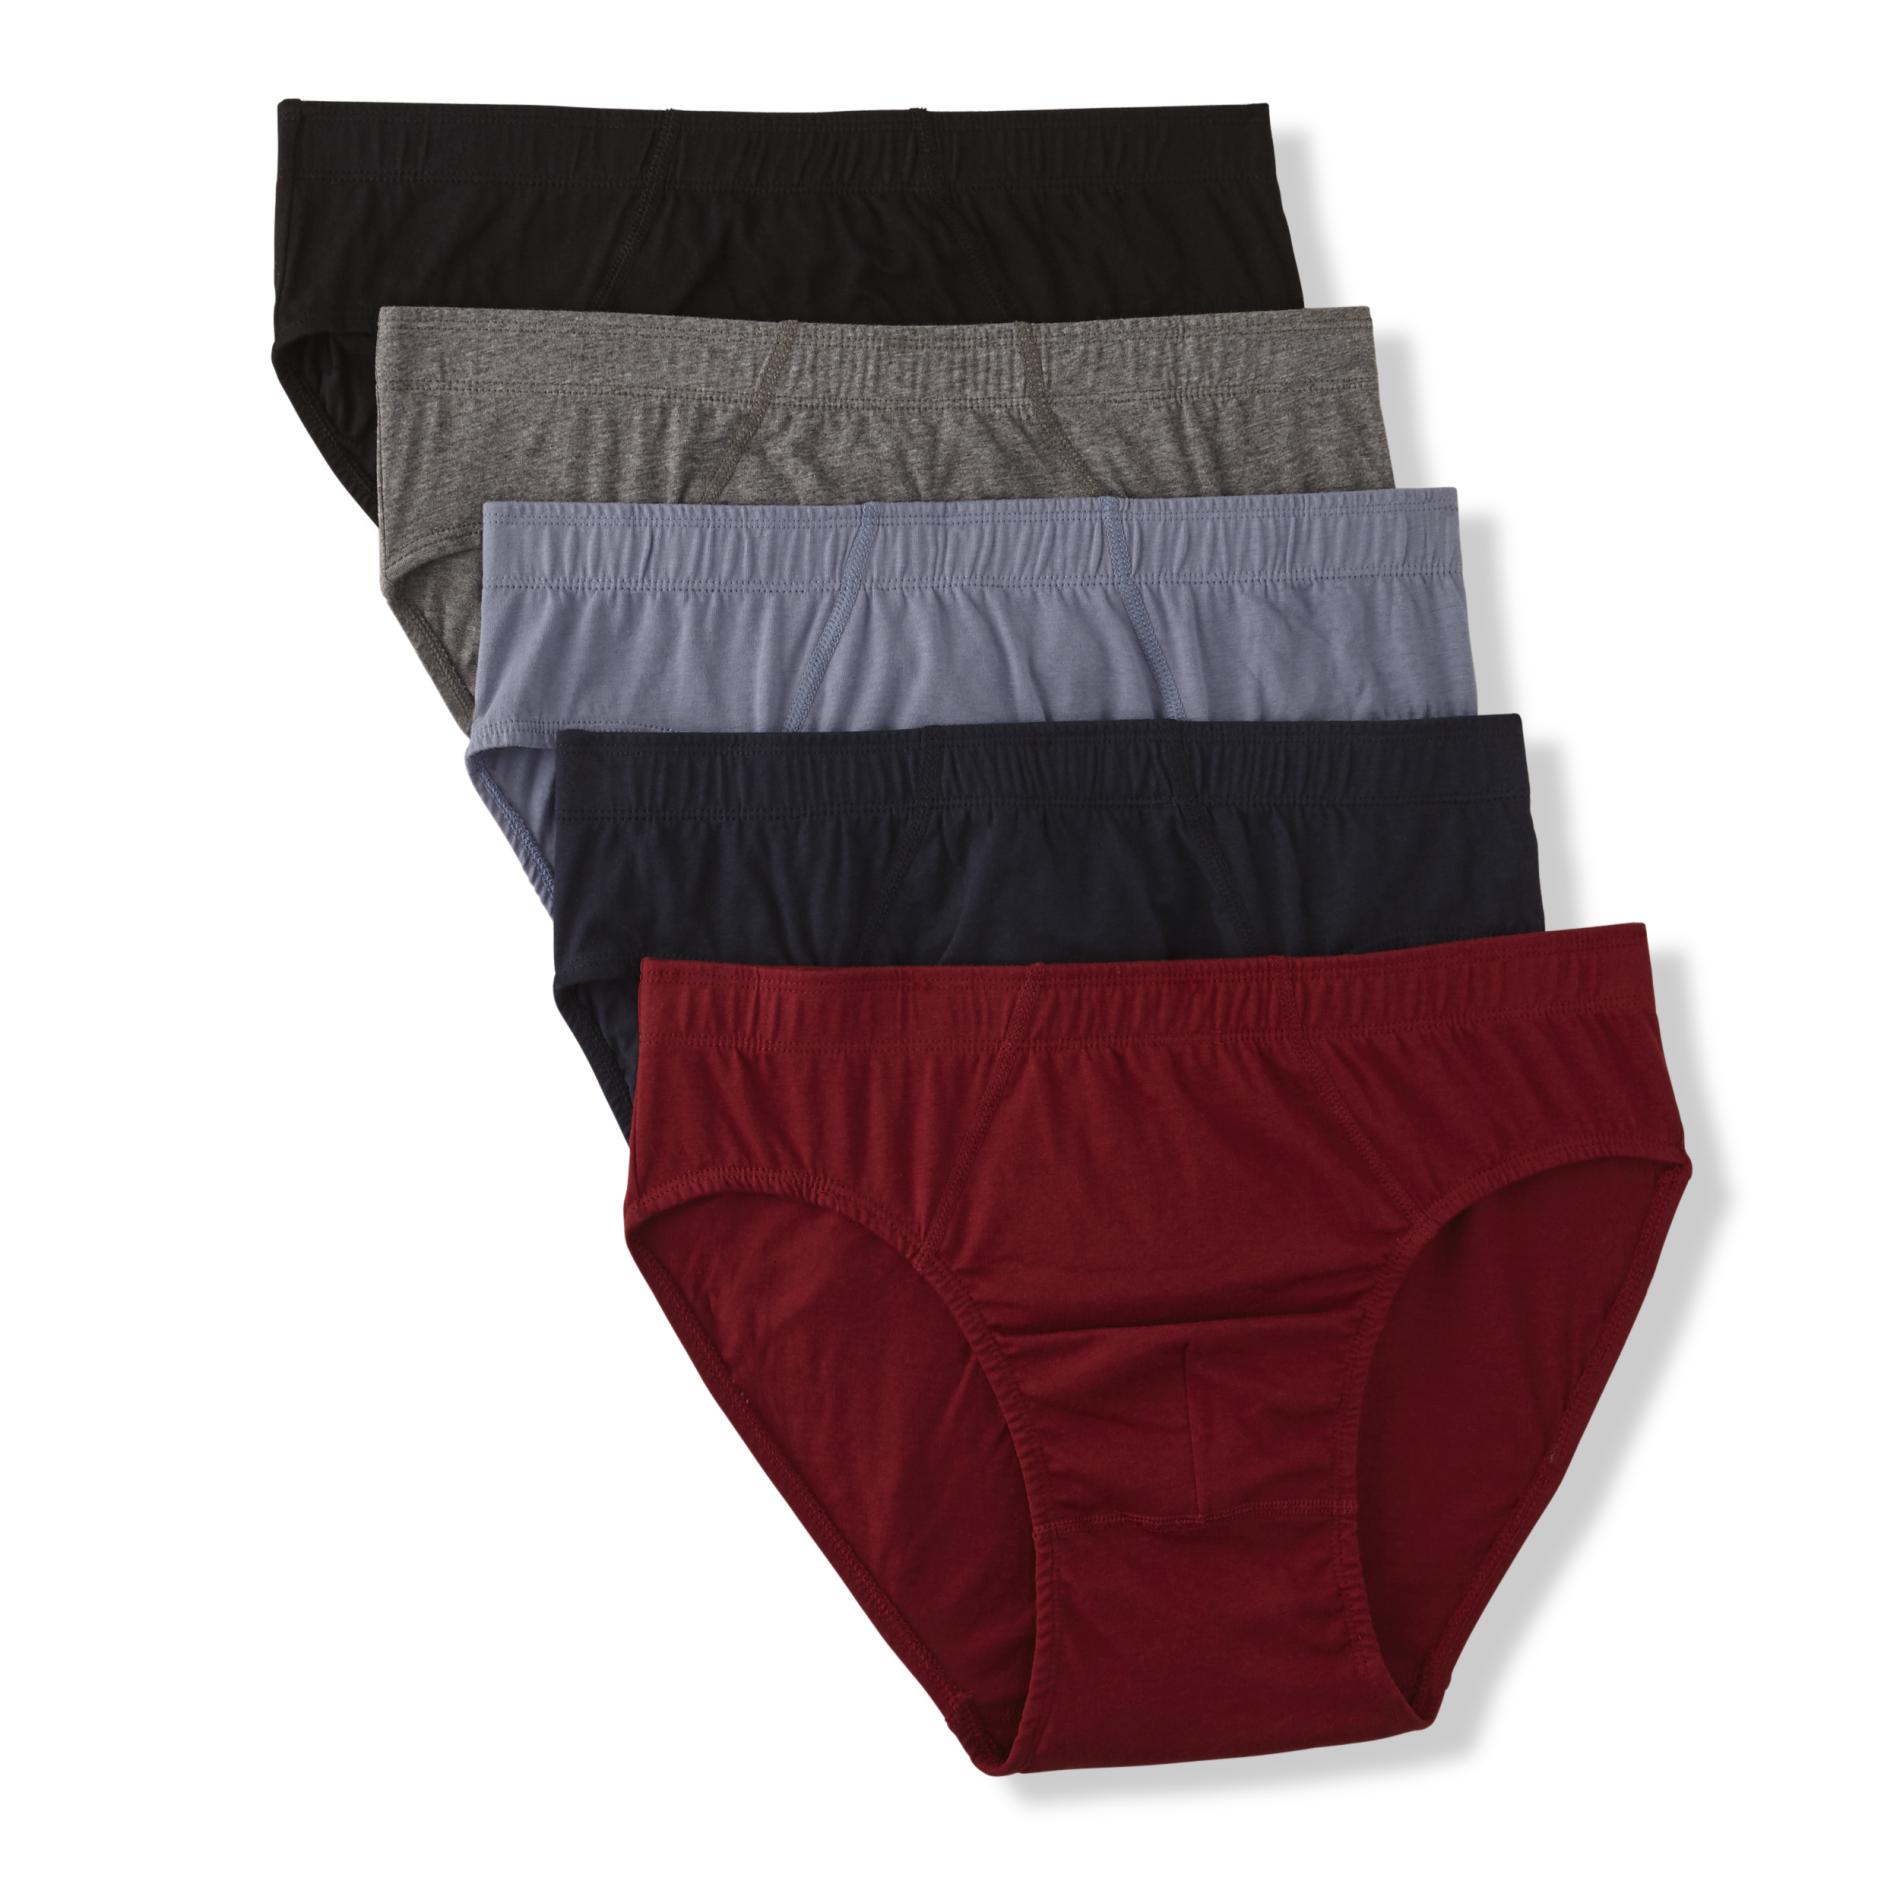 Simply Styled Men's 5-Pack Briefs